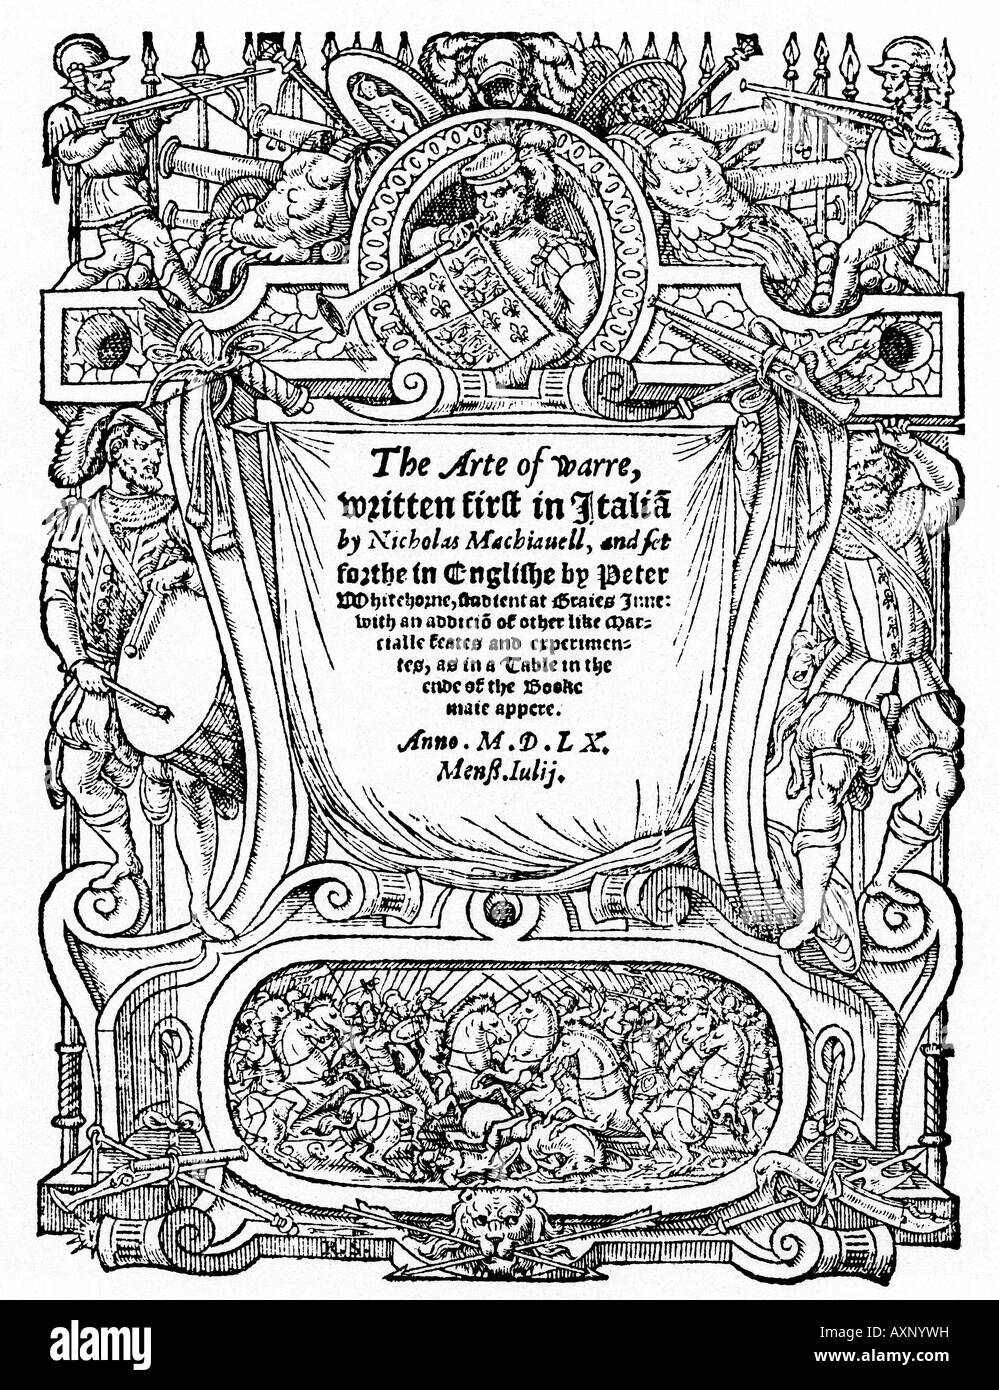 THE ARTE OF WARRE Frontespice of the book by Nicholas Machiavelli in the English translation of 1560 Stock Photo